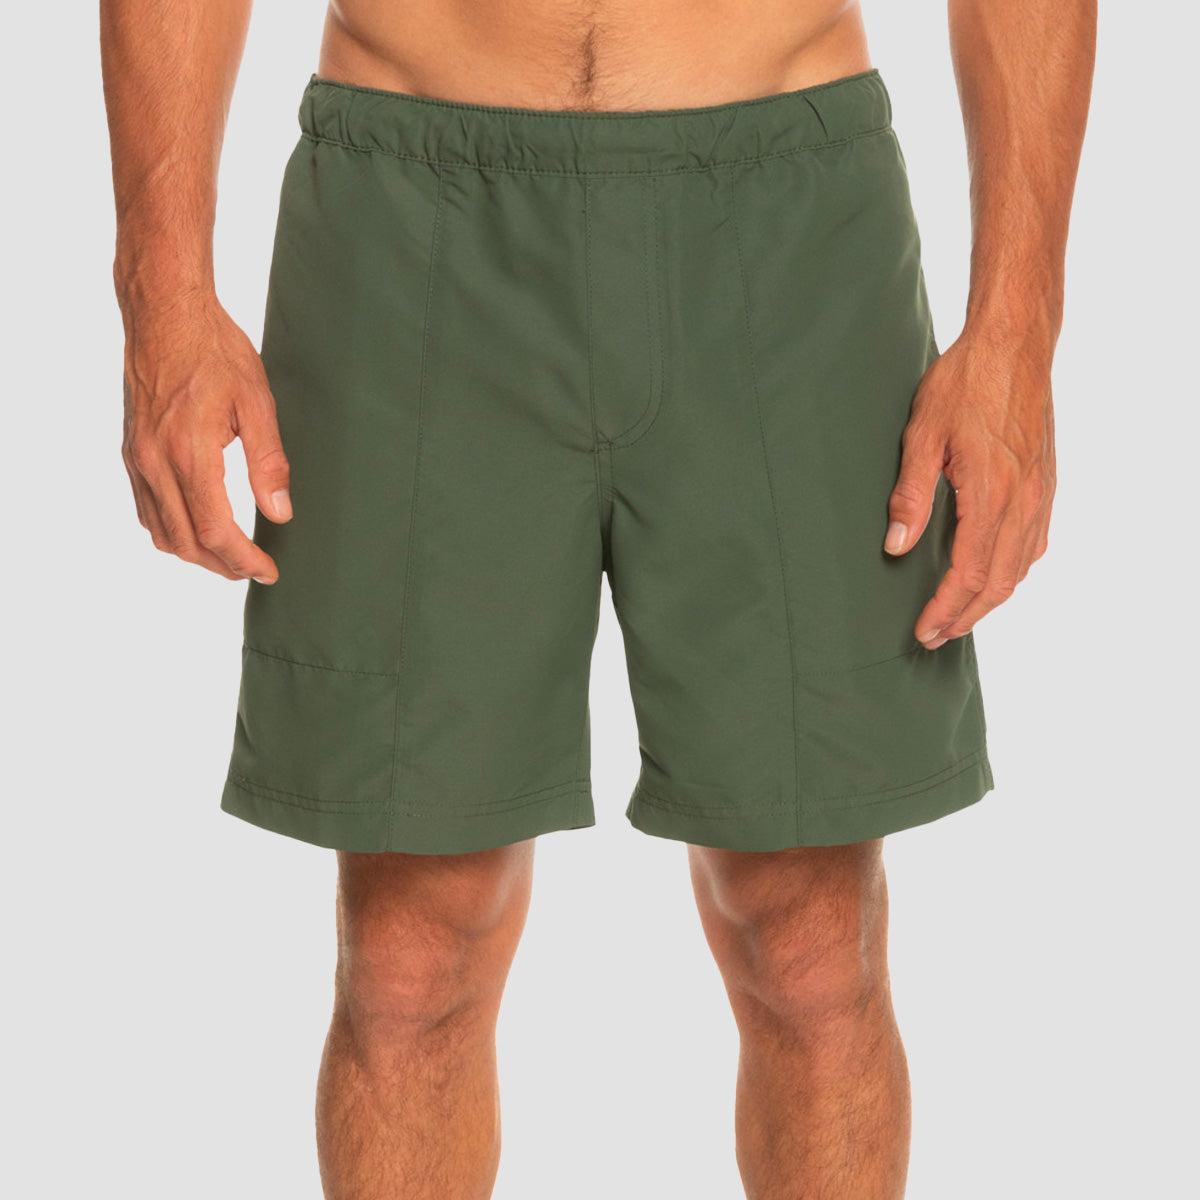 Quiksilver Made Better 17" Amphibian Boardshorts Thyme